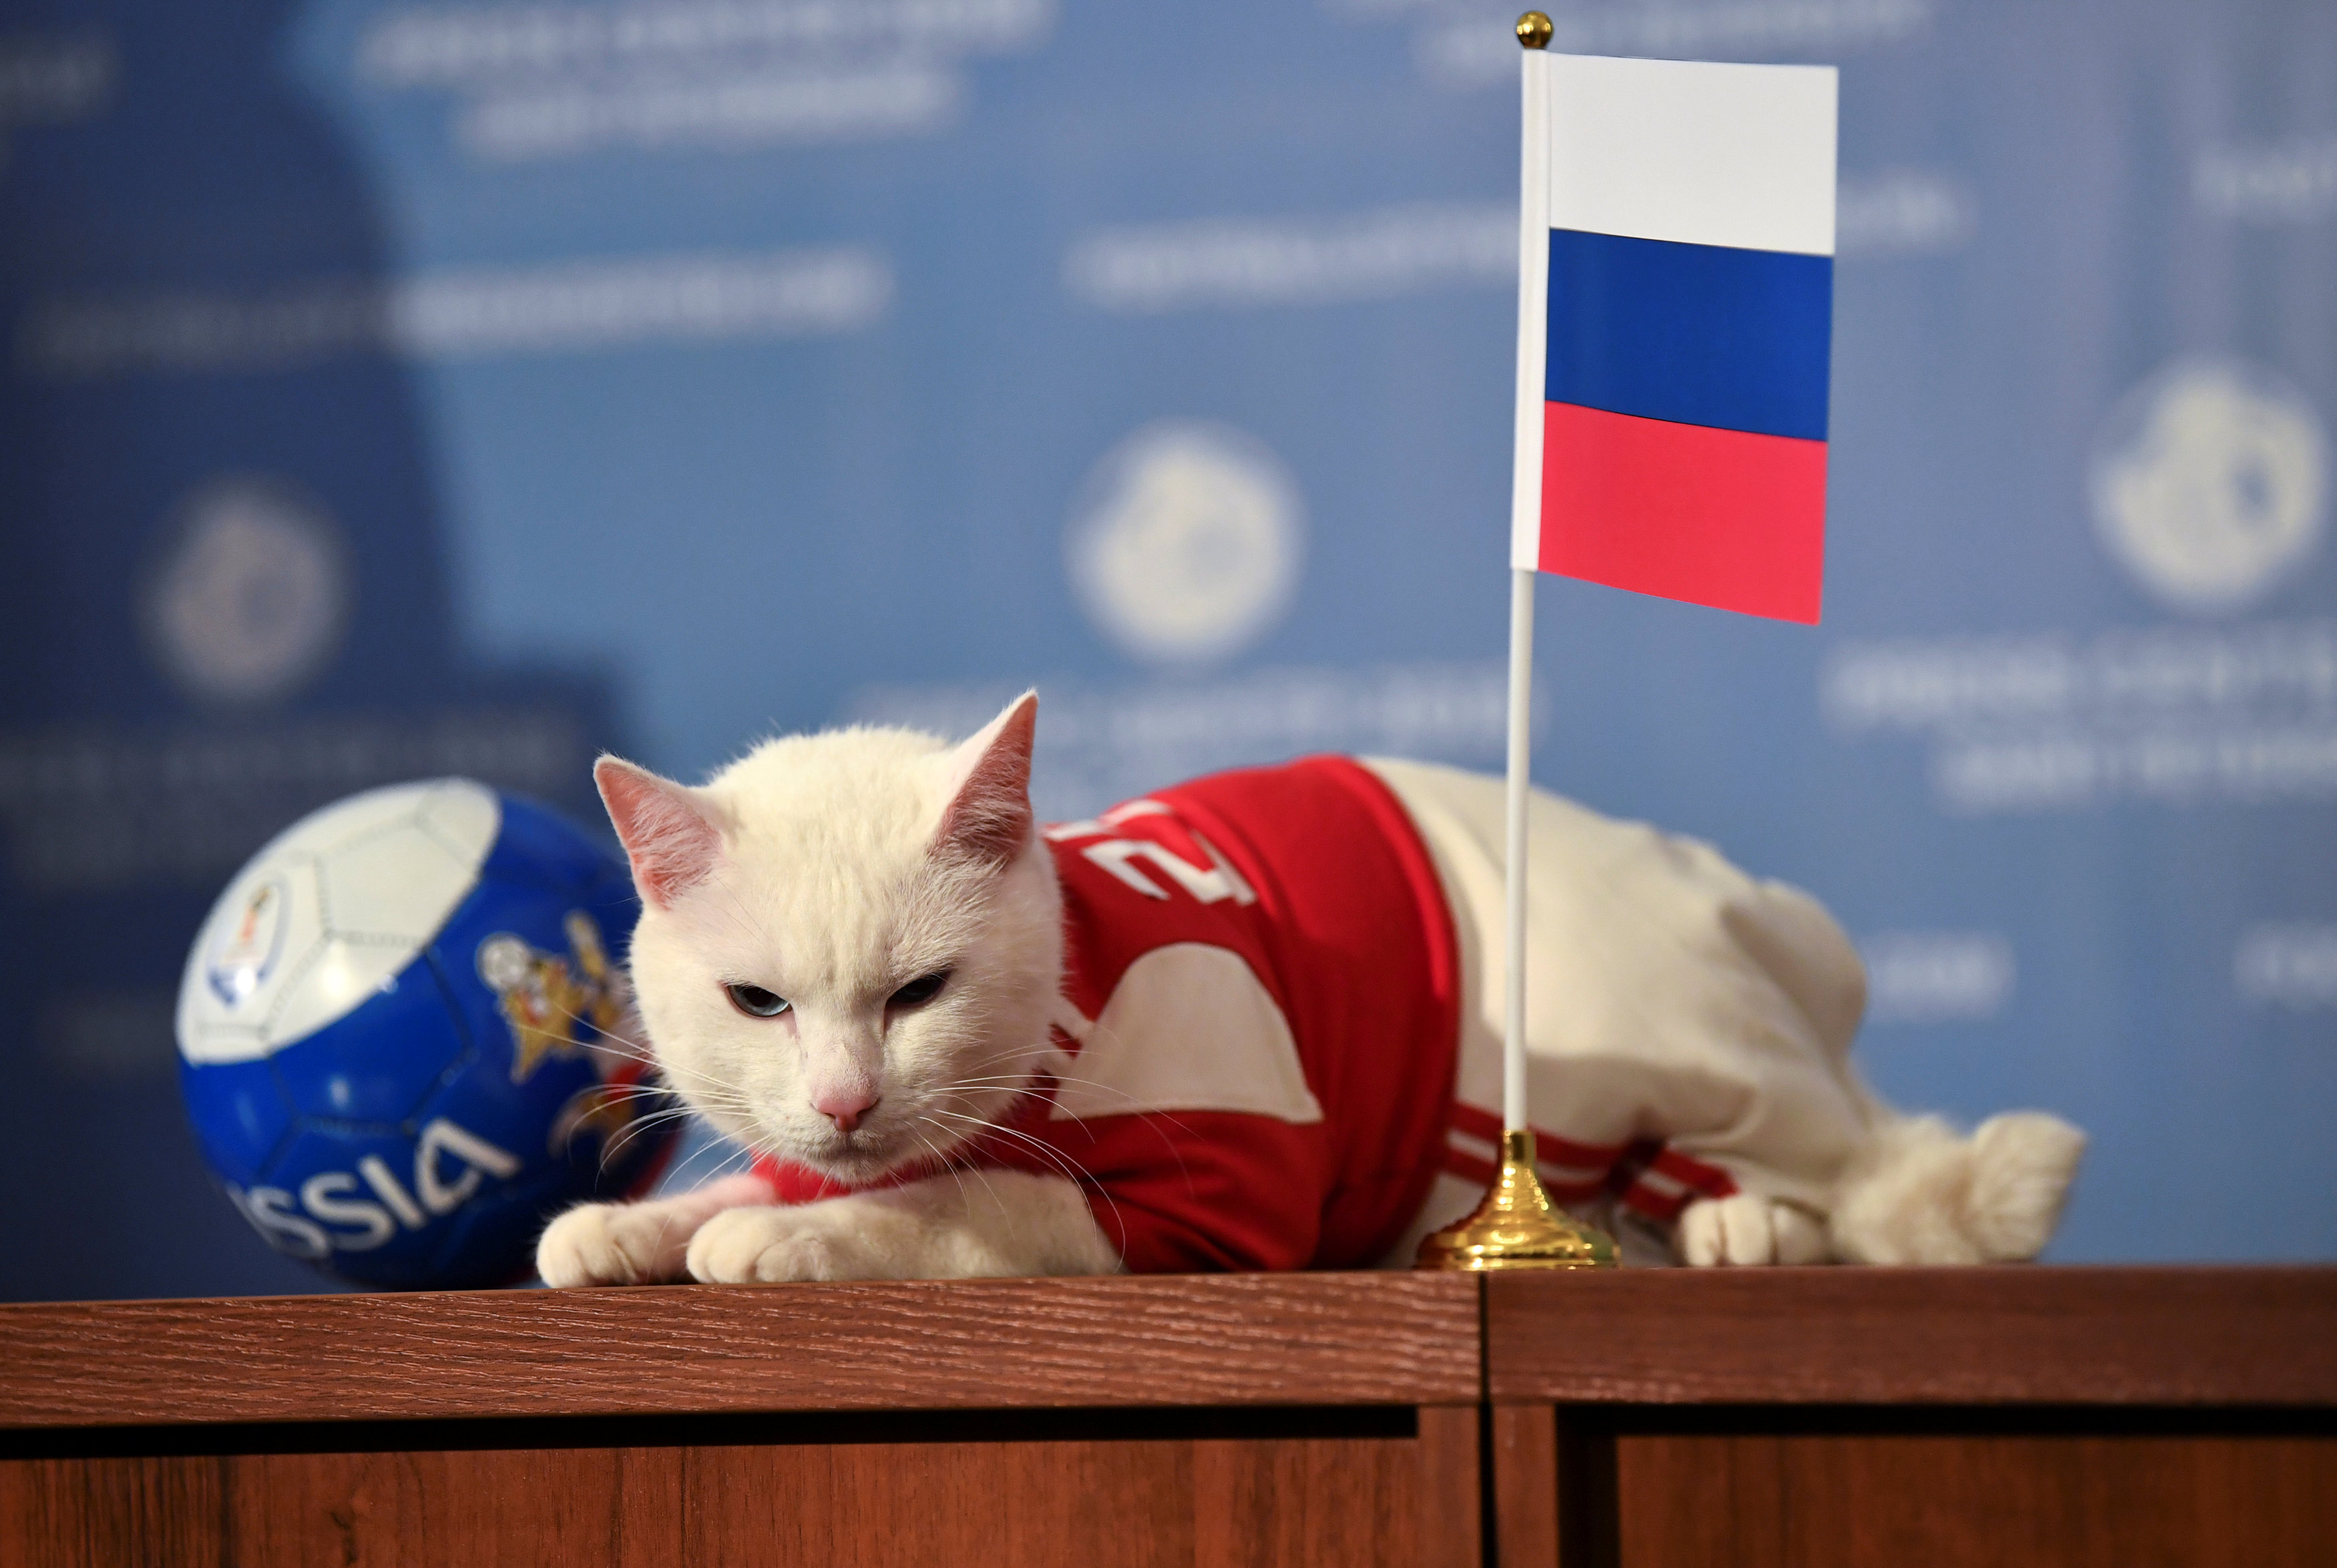 FILE PHOTO: Achilles the cat, one of the State Hermitage Museum mice hunters, attempts to predict the result of the opening match of the 2018 FIFA World Cup between Russia and Saudi Arabia during an event in Saint Petersburg, Russia June 13, 2018. REUTERS/Dylan Martinez/File Photo